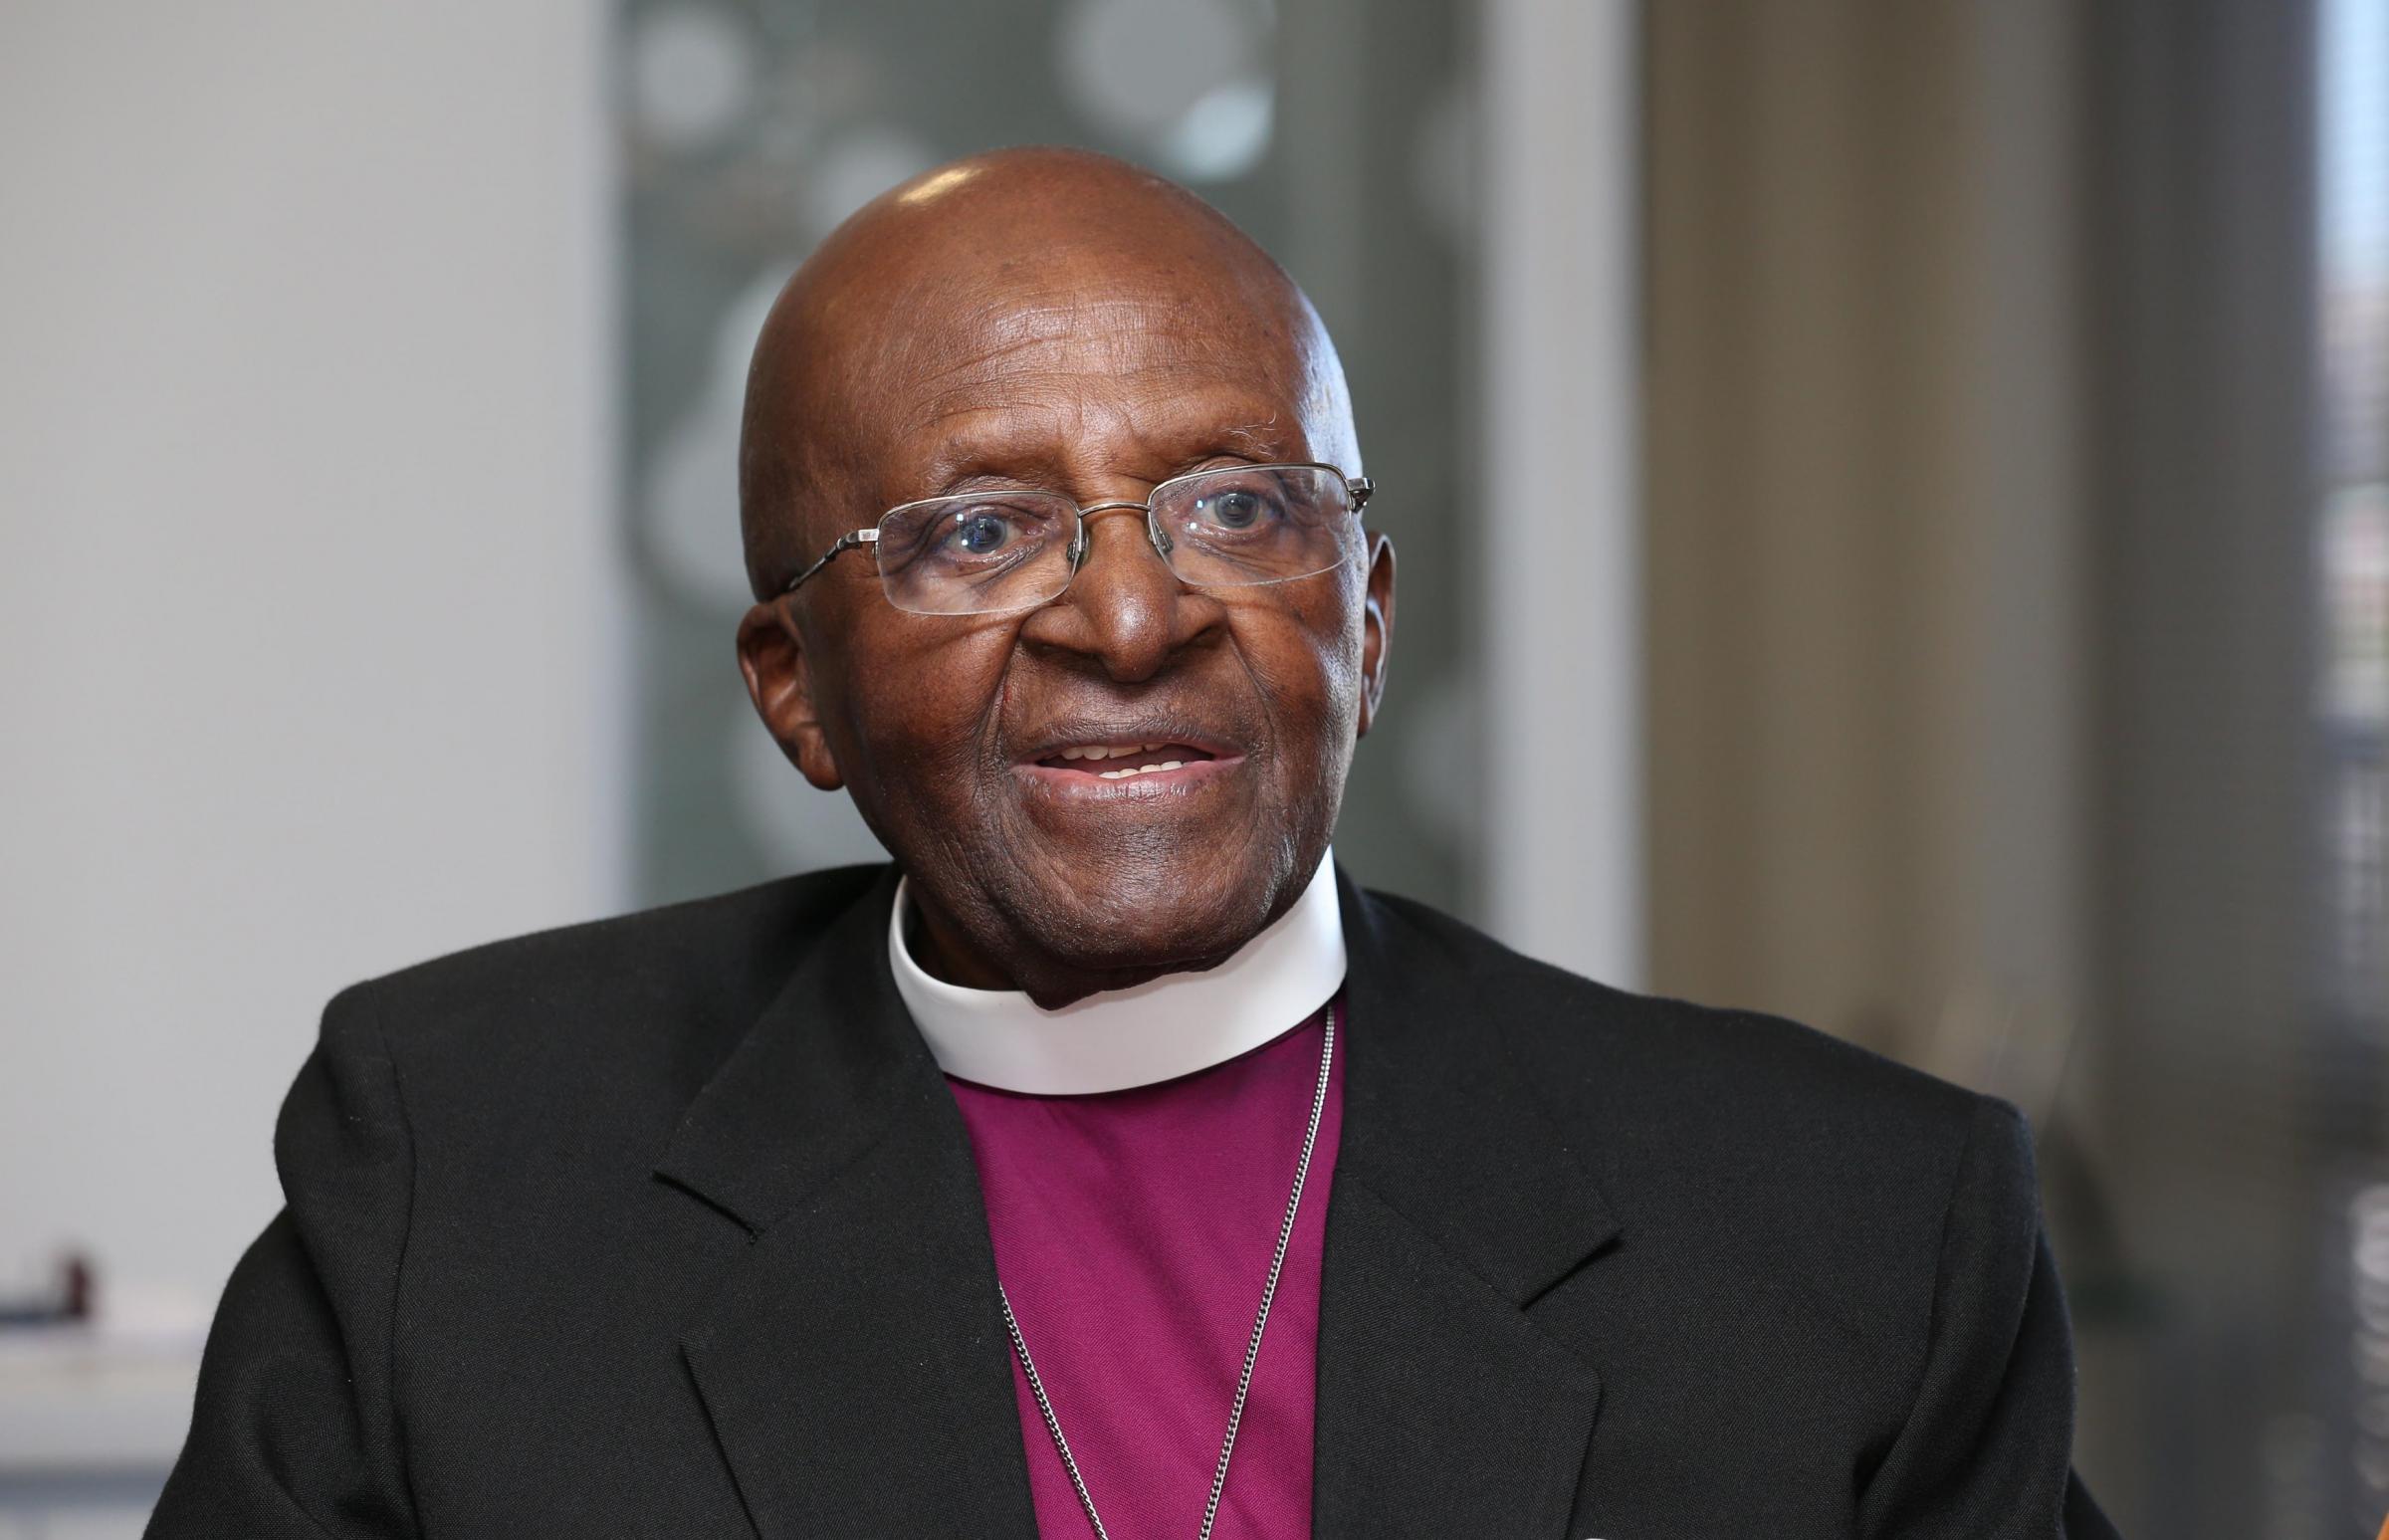 File photo of the Archbishop Emeritus Desmond Tutu at the offices of The Desmond Leah Tutu Legacy Foundation in Cape Town. Picture: Chris Radburn/PA Wire